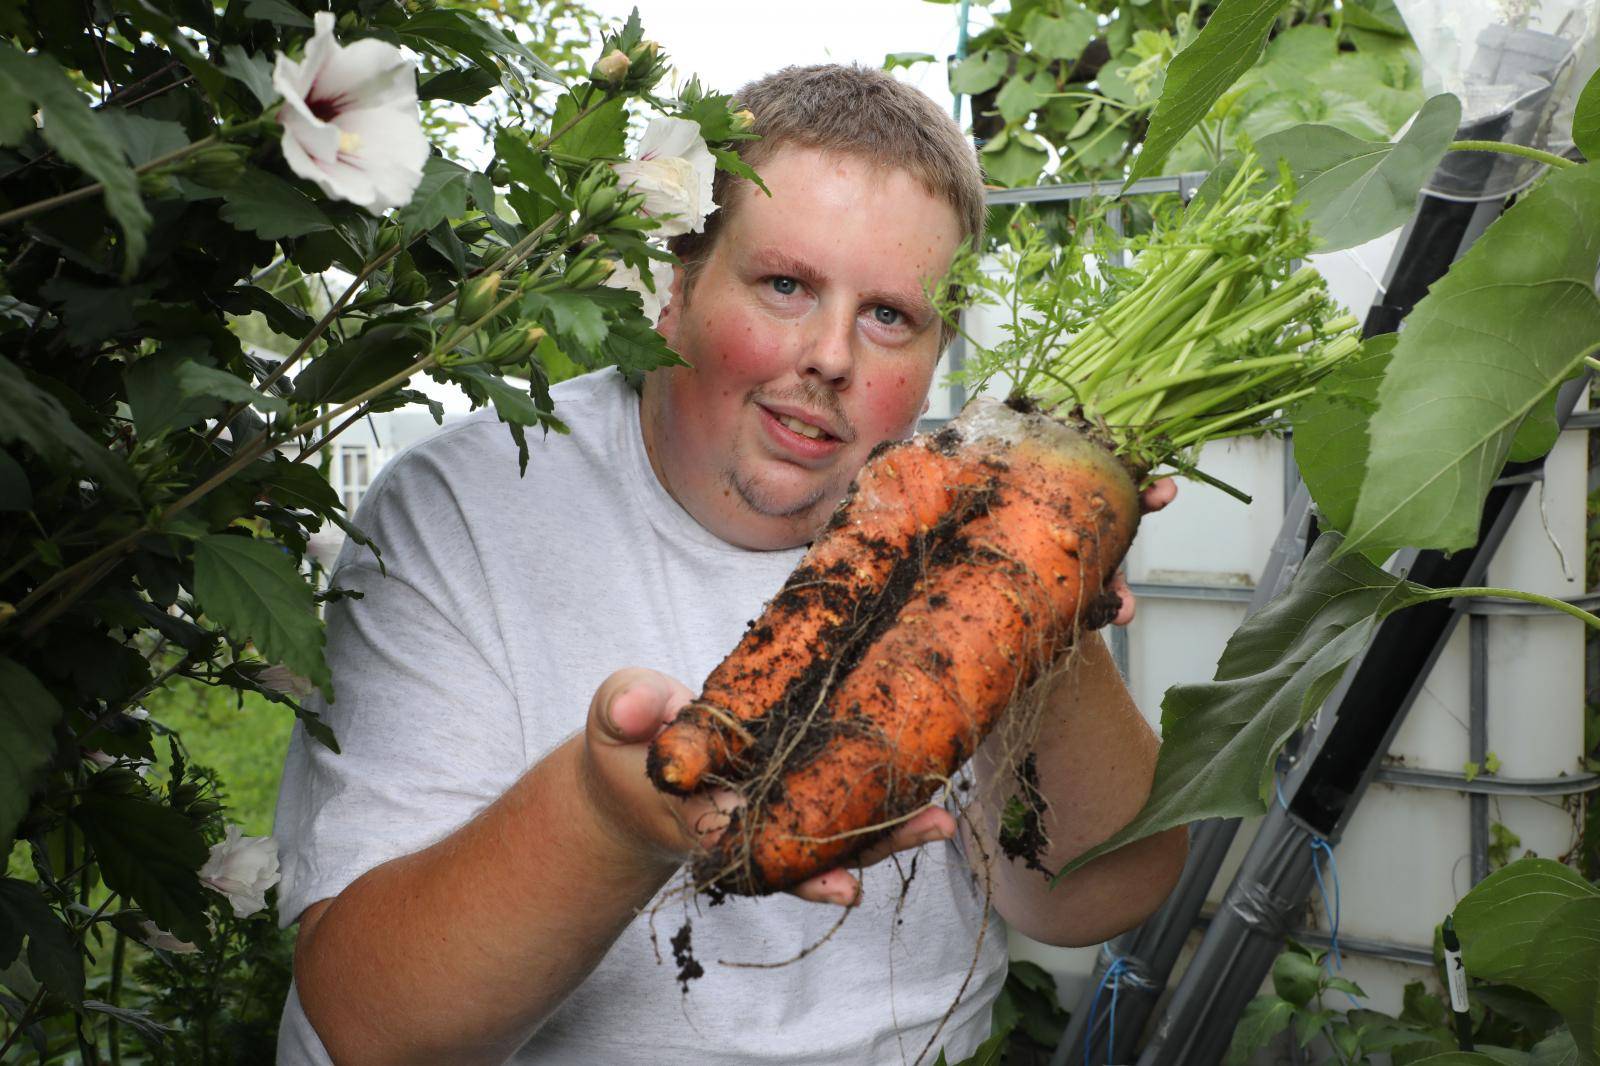 On record hunt with XXL vegetables